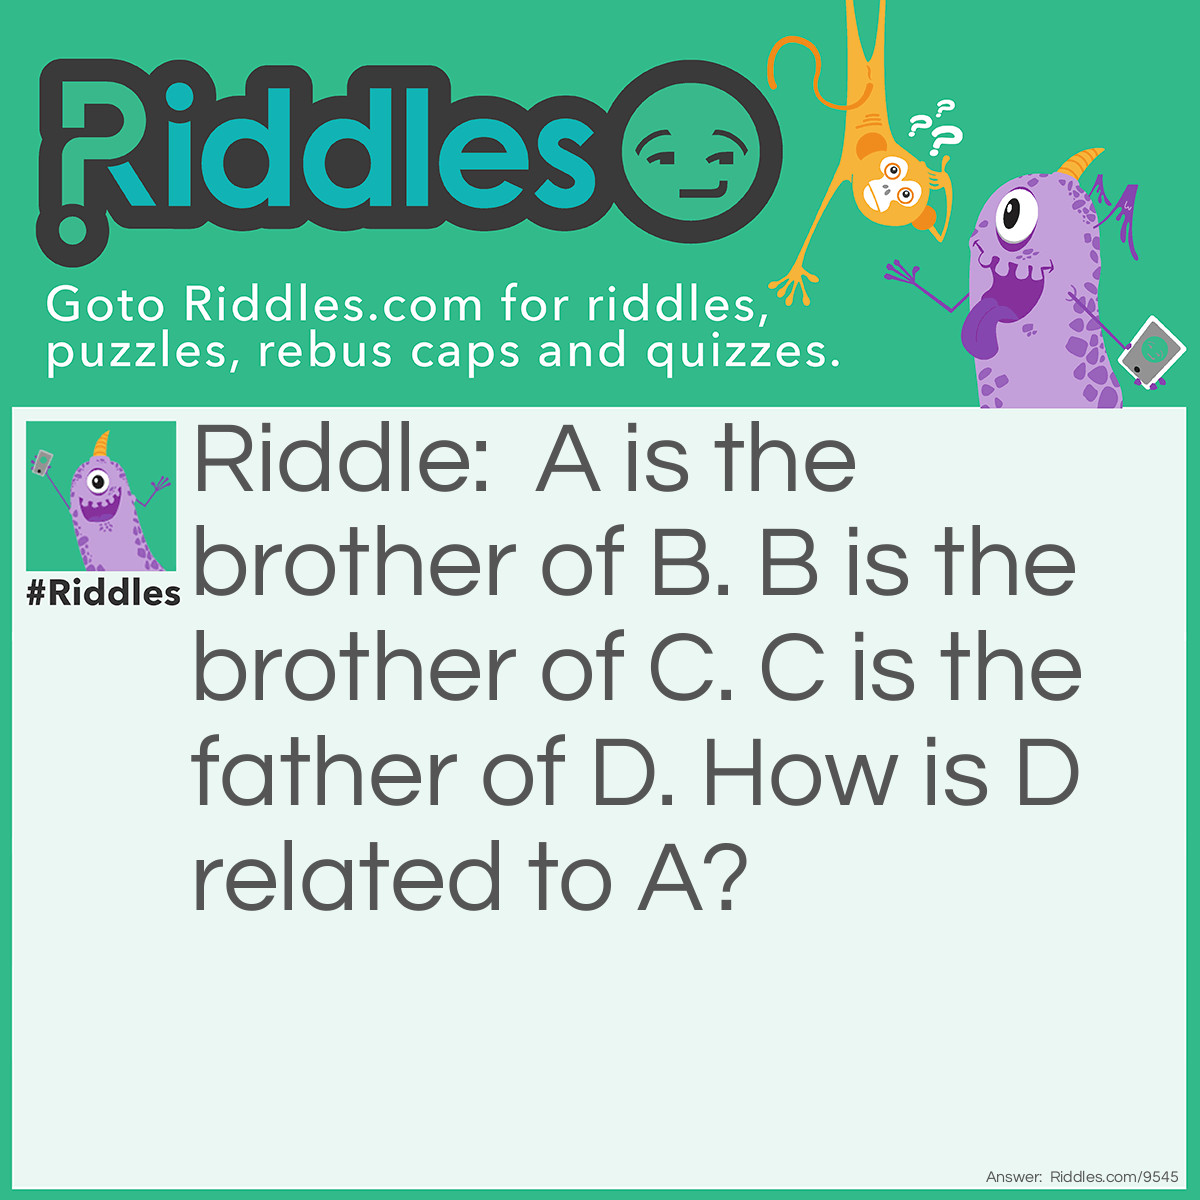 Riddle: A is the brother of B. B is the brother of C. C is the father of D. How is D related to A? Answer: A is D’s aunt.